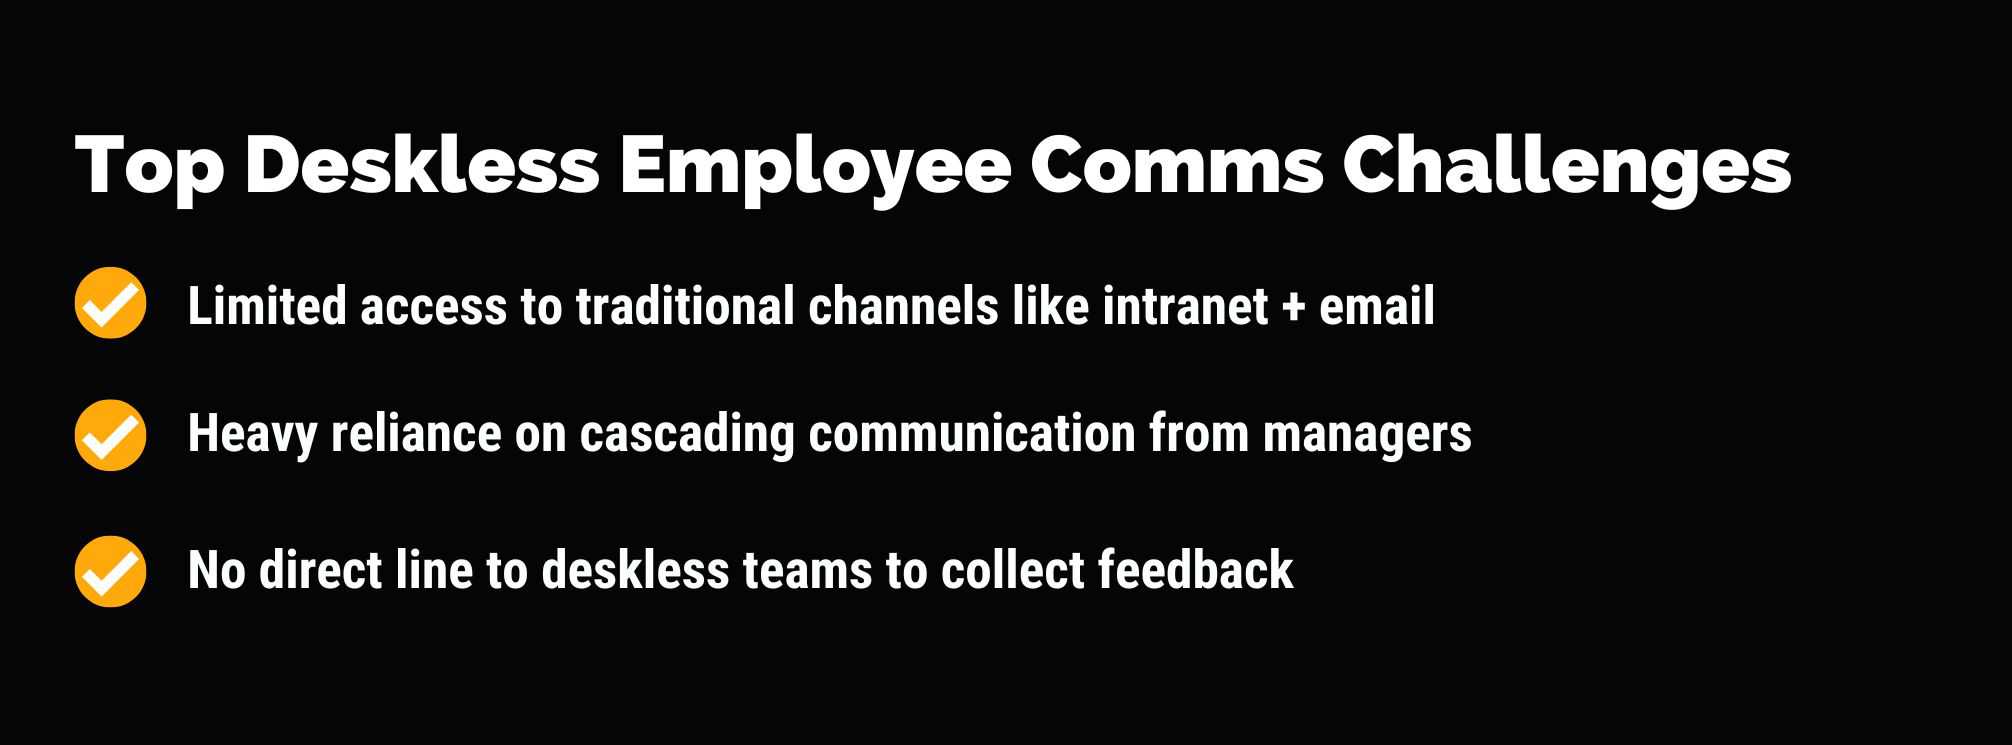 text based graphic that says: Top Deskless Comms Challenges. Limited access to traditional channels like intranet and email. Heavy reliance on cascading communication from managers. No direct line to deskless teams to collect feedback.